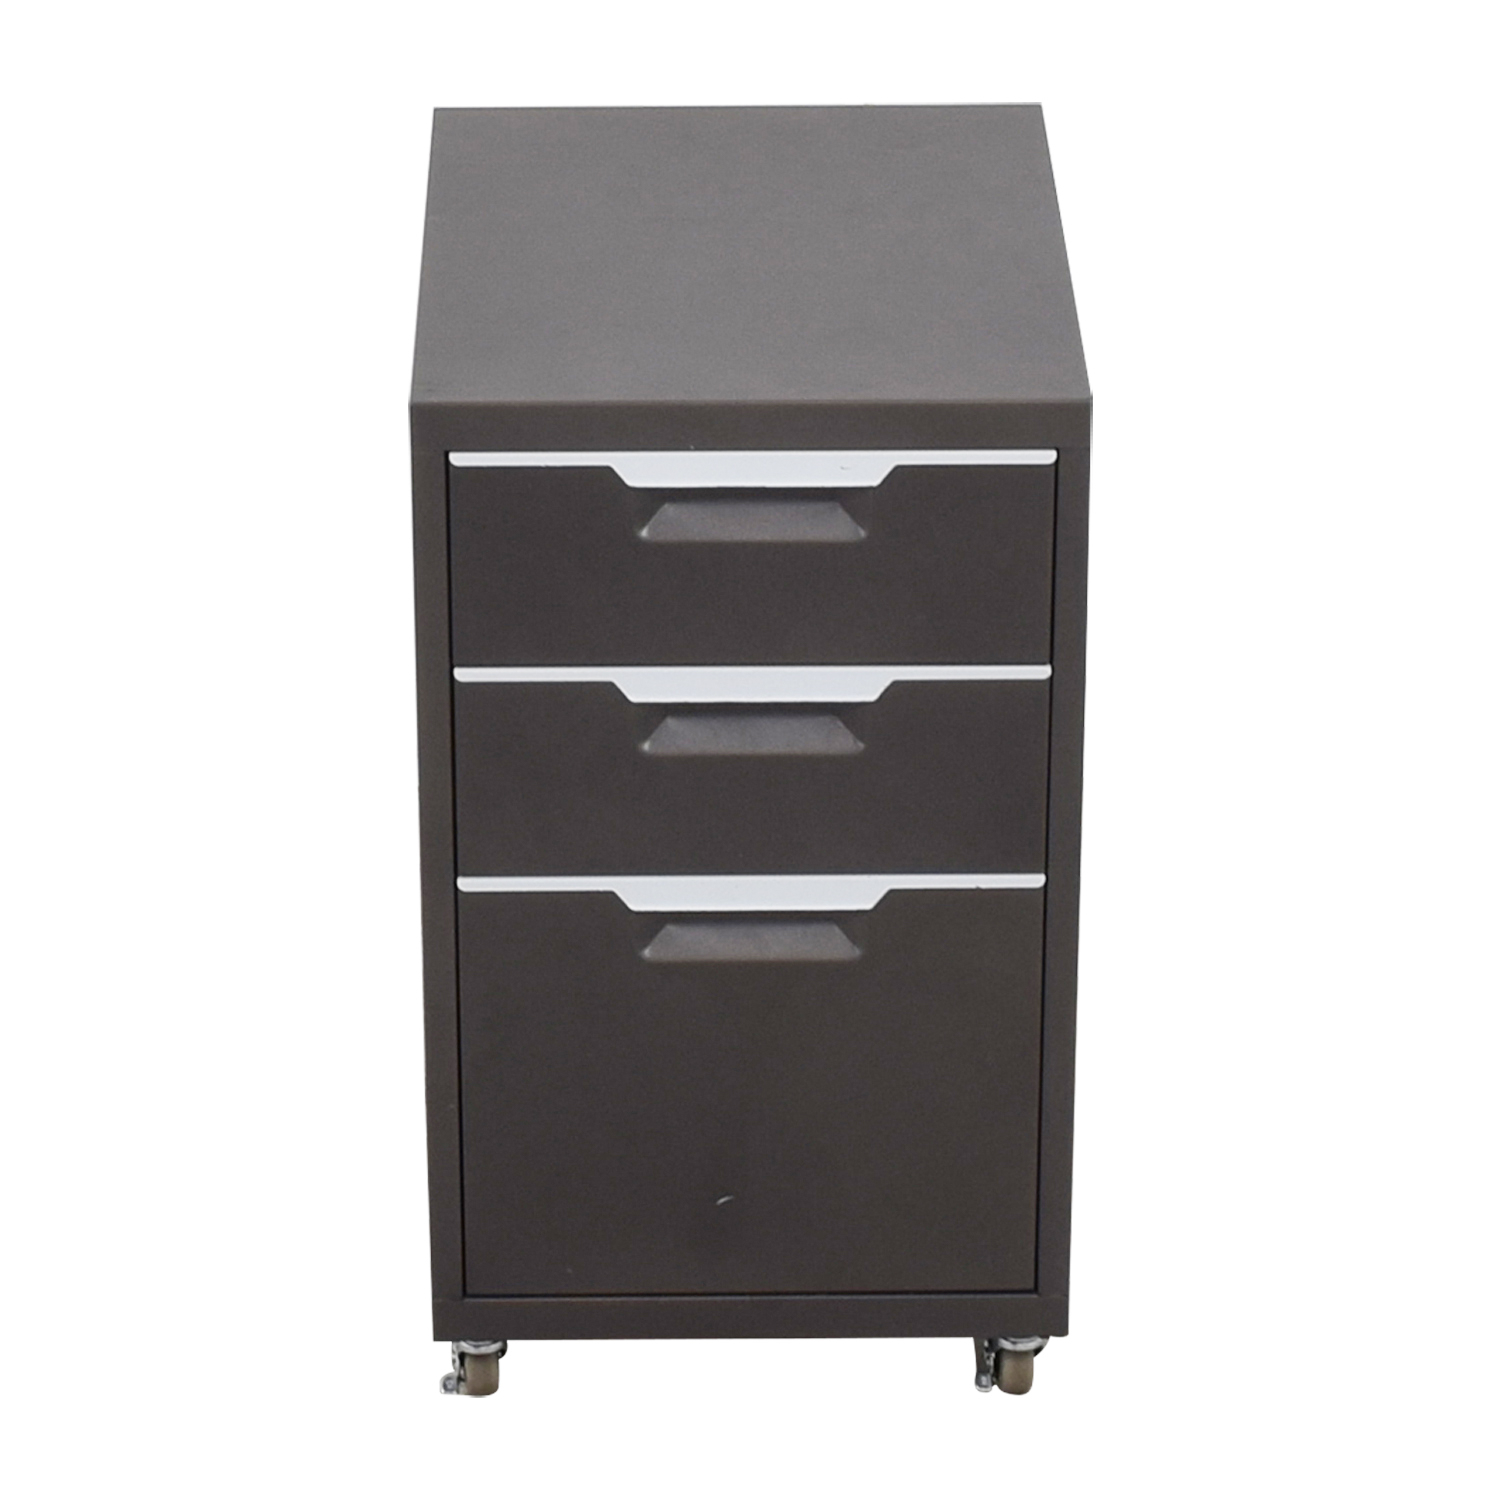 57 Off Cb2 Cb2 Metal File Cabinet Storage throughout proportions 1500 X 1500